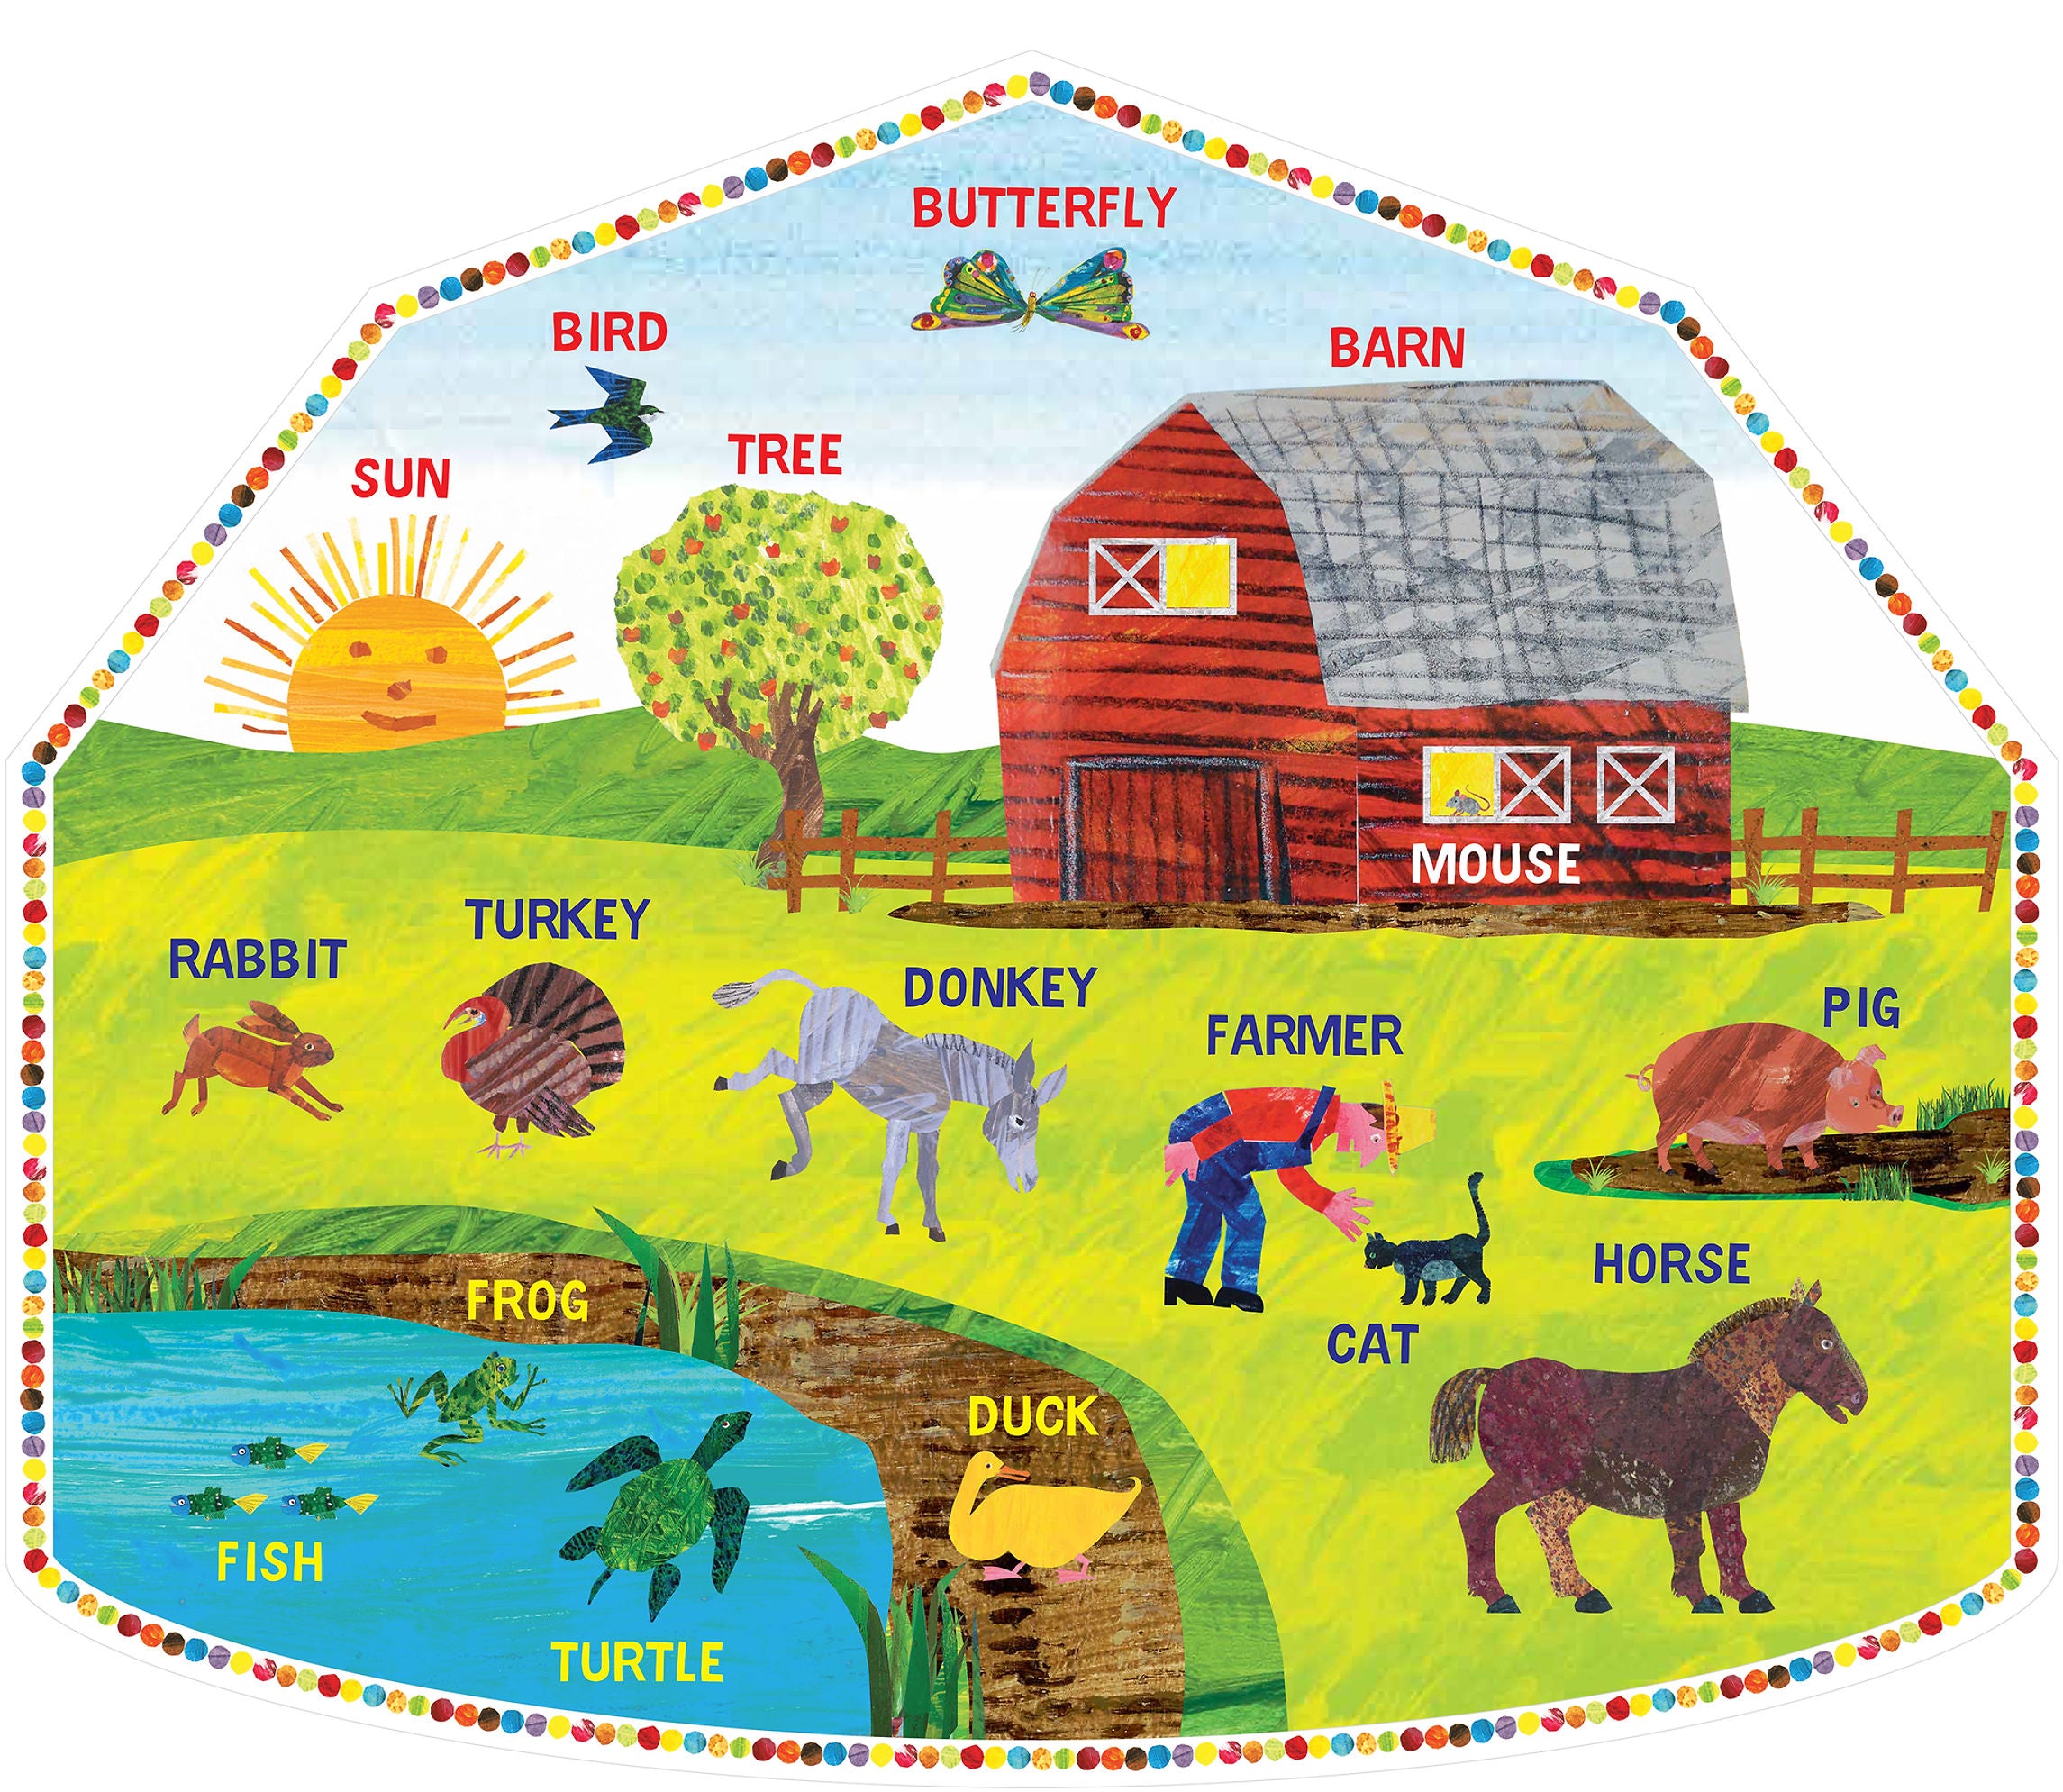 The World of Eric Carle Around the Farm 26 piece 2-Sided Floor Puzzle    